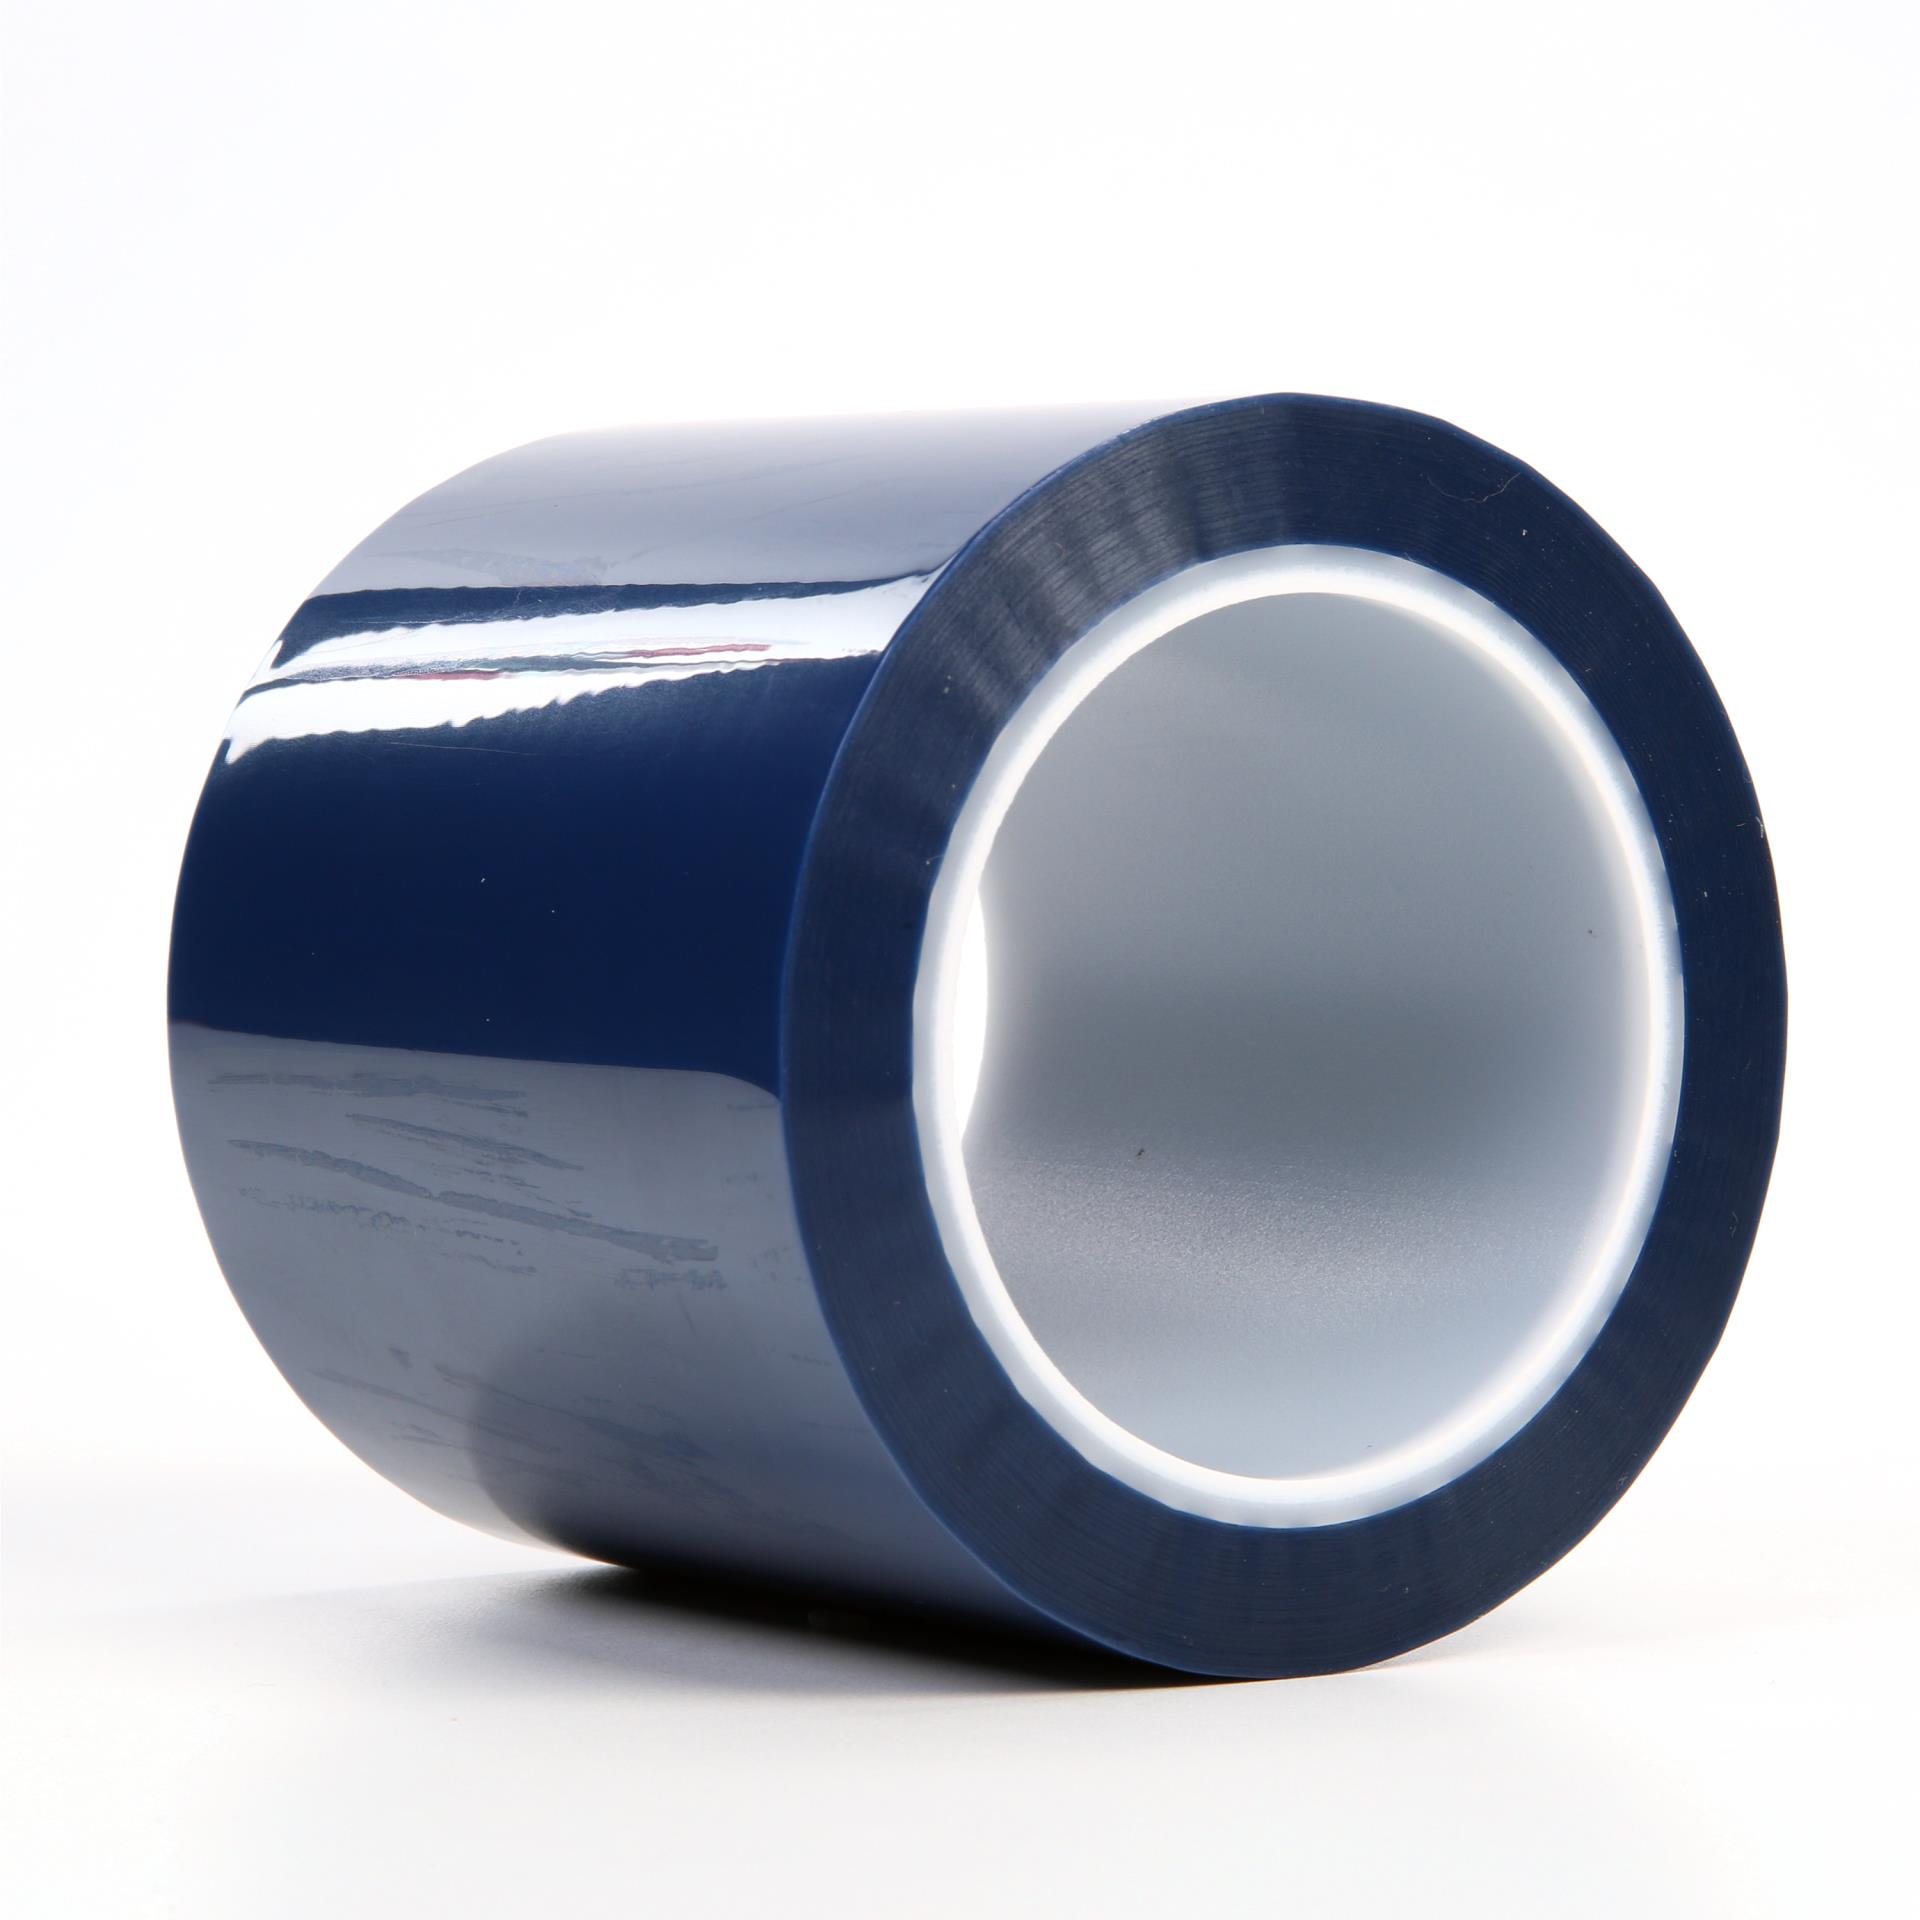 https://www.e-aircraftsupply.com/ItemImages/34/7010374934_3M_Polyester_Tape_8991_Blue.jpg